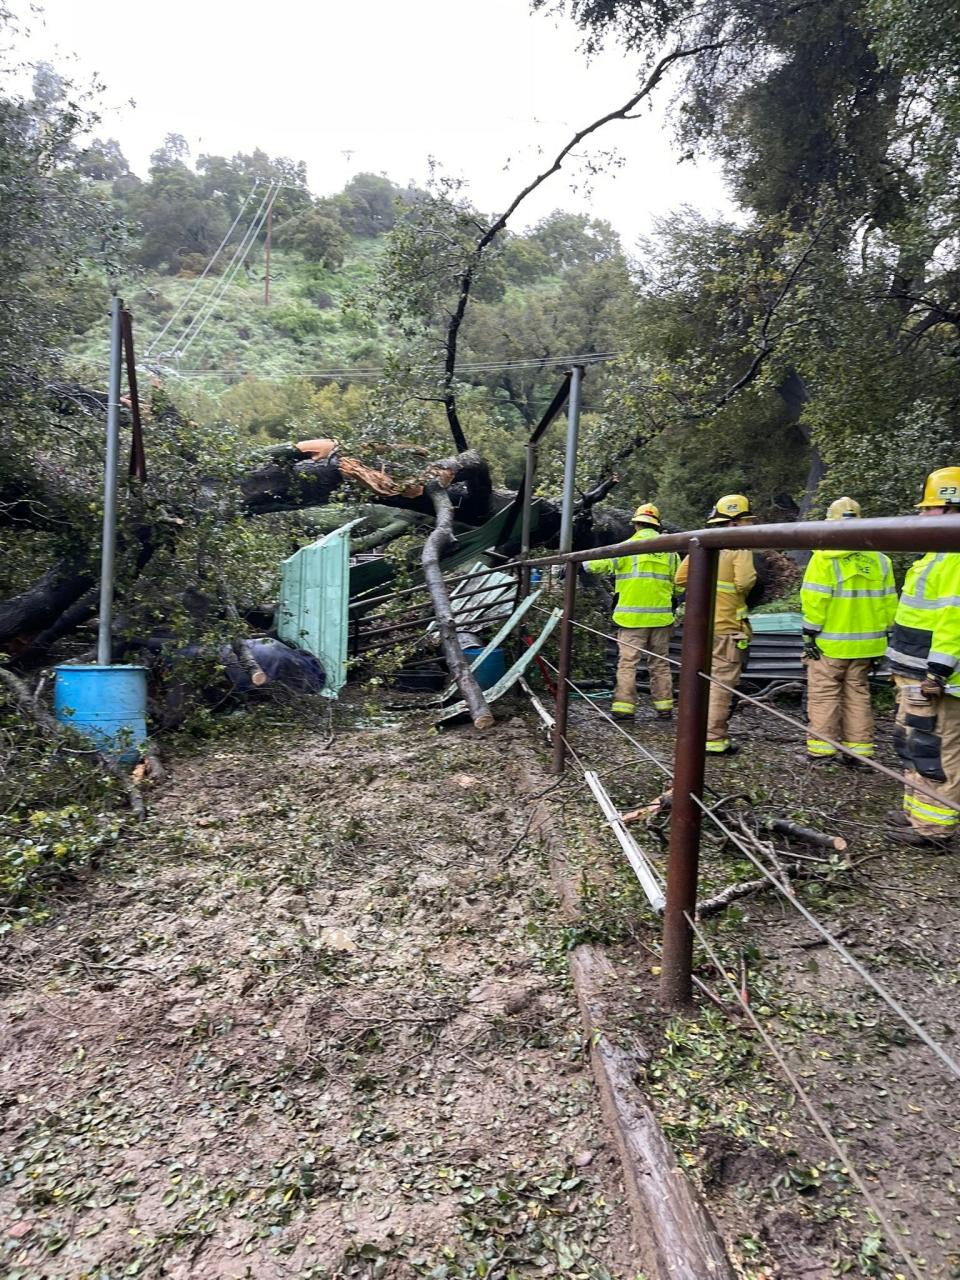 Ventura County firefighters rescued two horses when an oak tree fell in the Oak View area Wednesday.